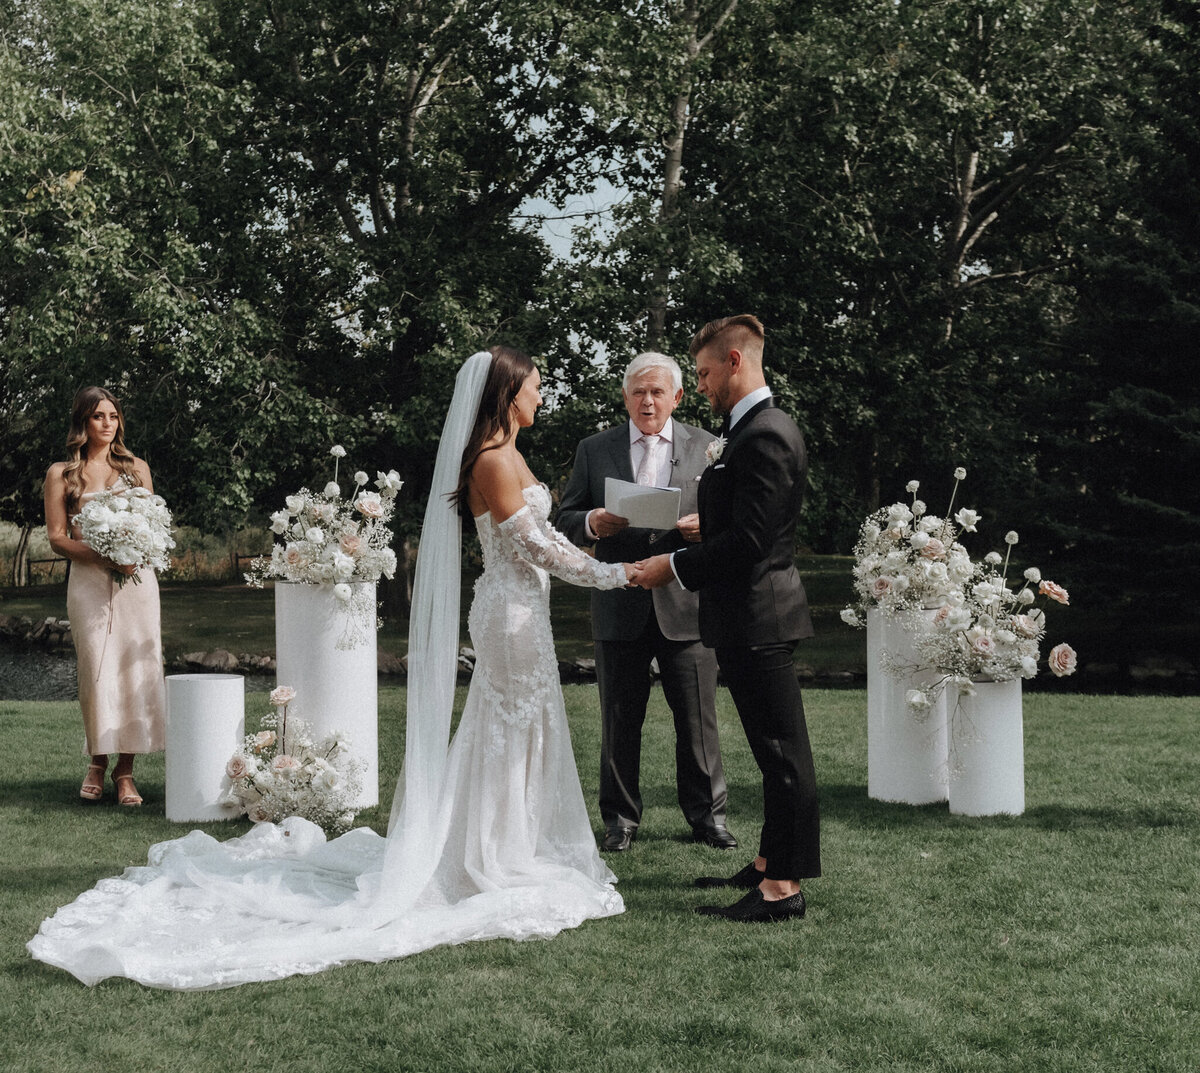 Stunning ceremony installation by Calyx Floral Design, an innovative Red Deer, Alberta wedding florist, featured on the Brontë Bride Vendor Guide.